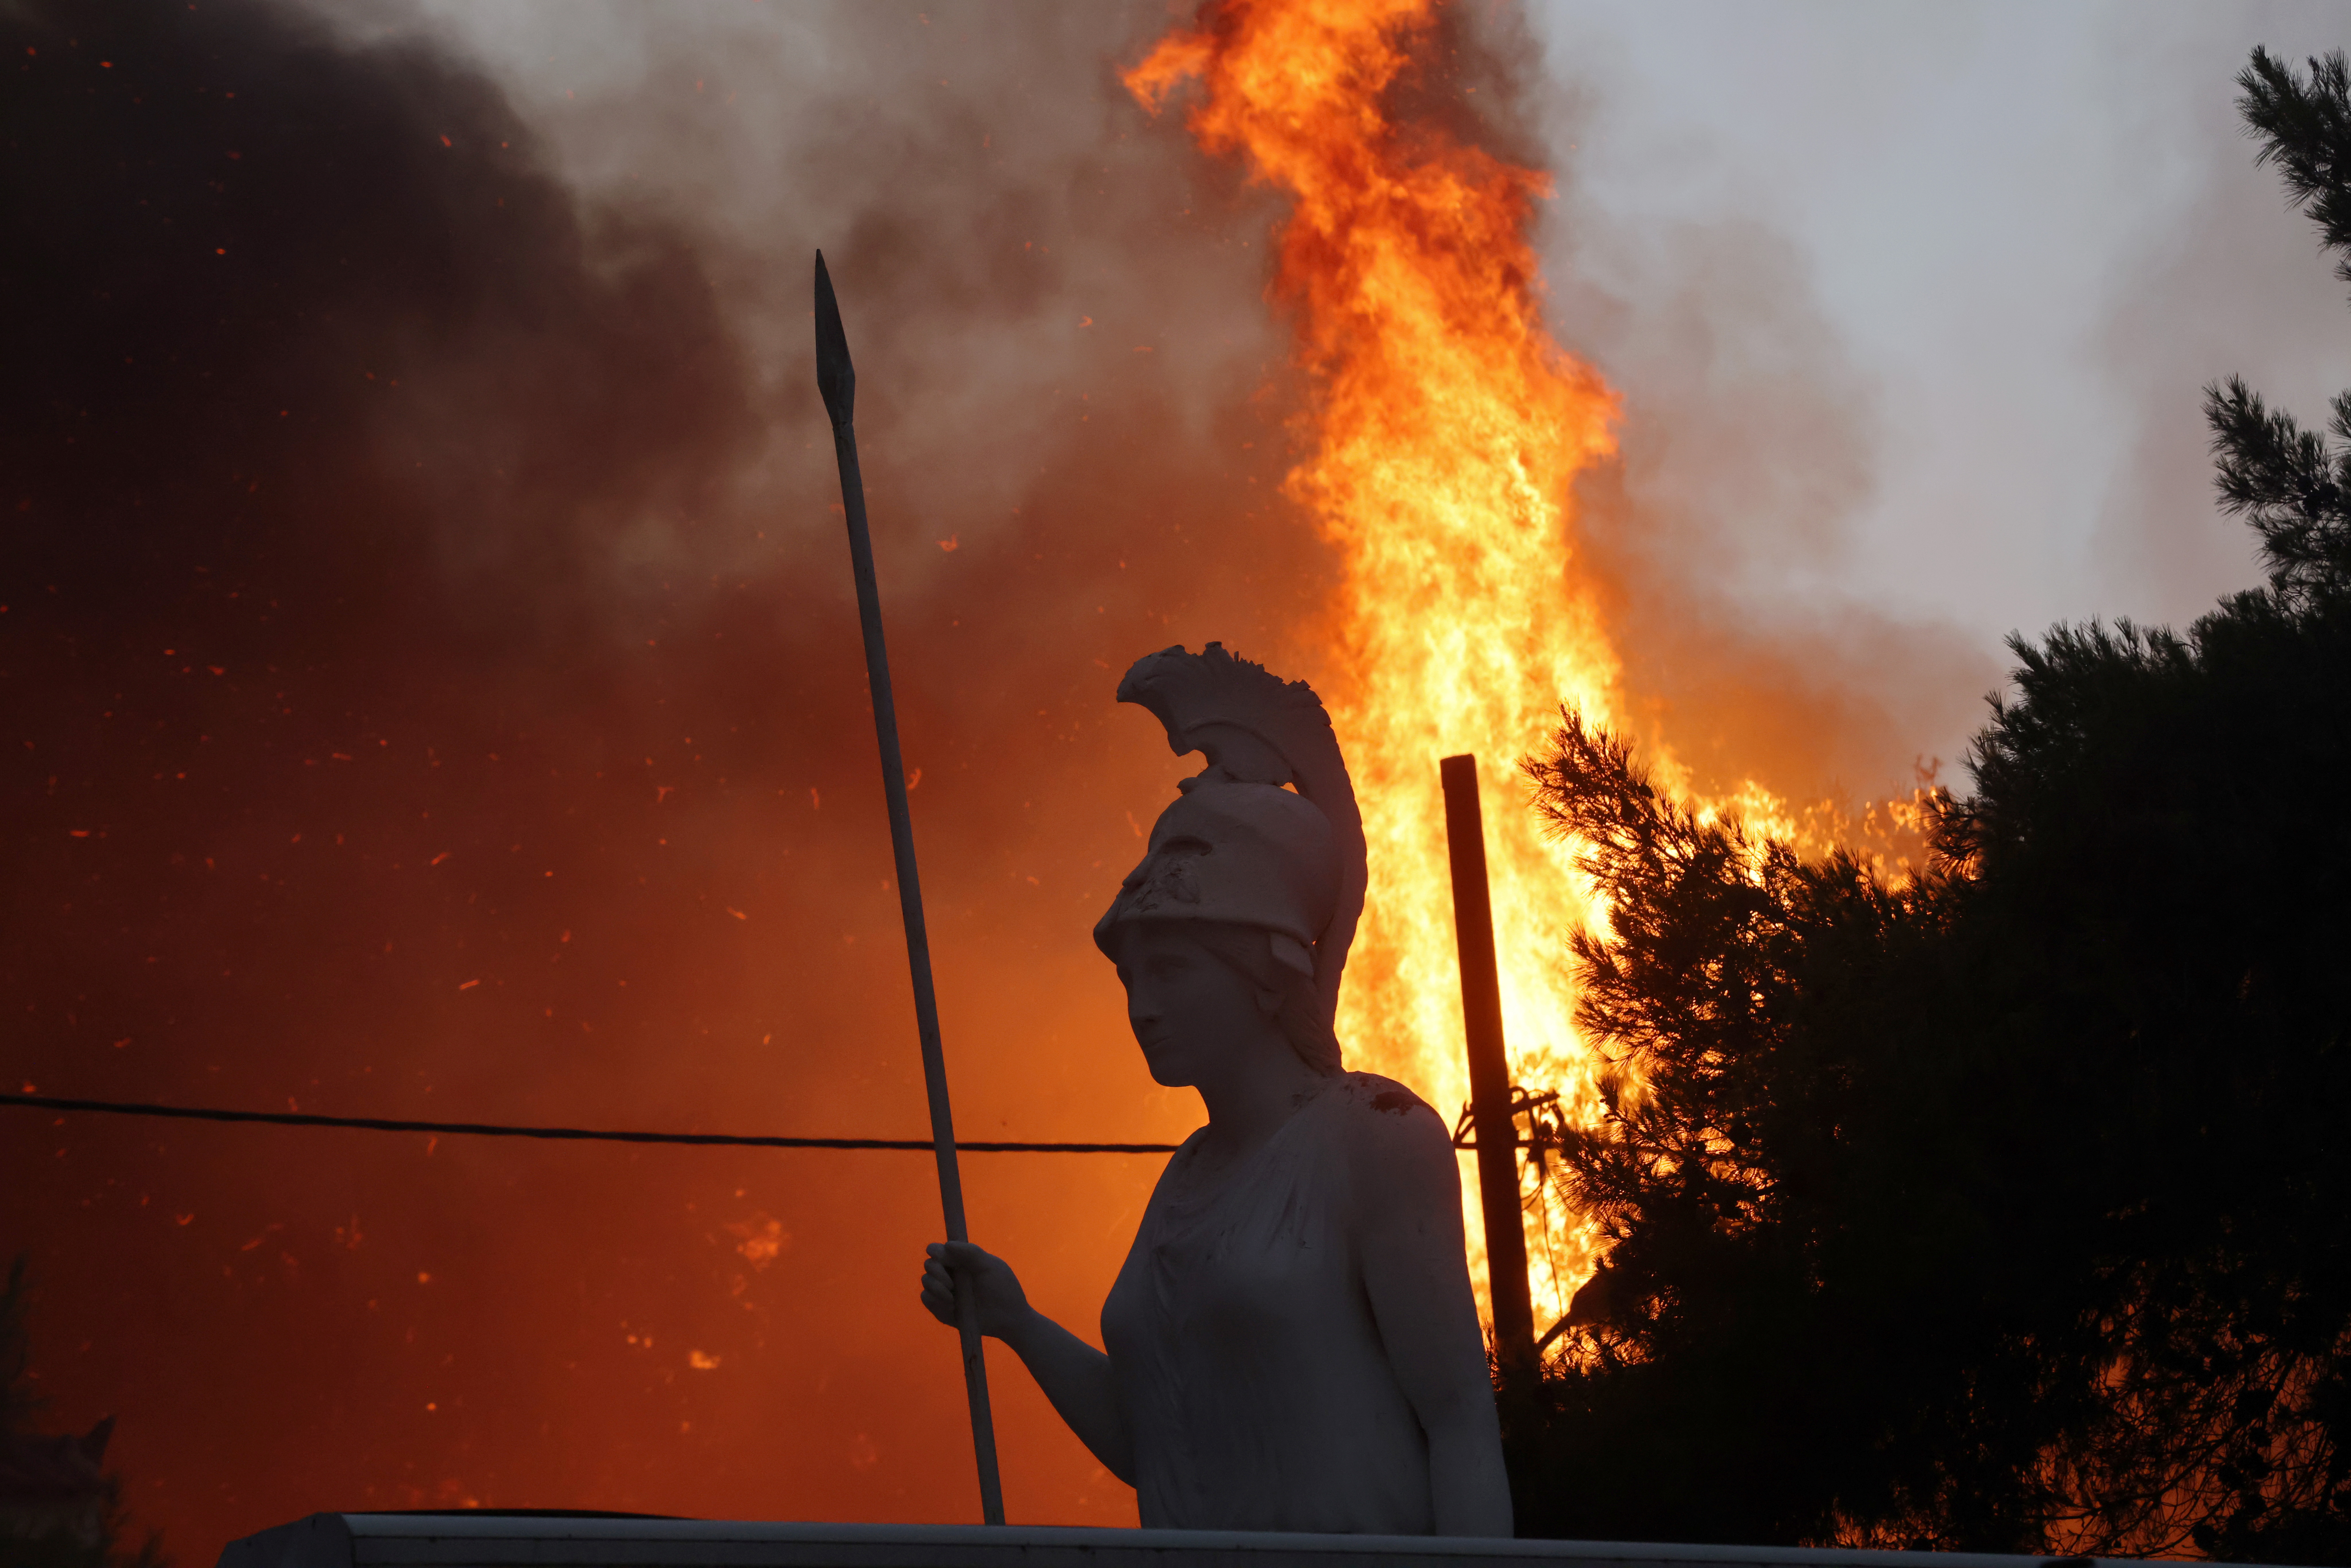 Athens suburbs brace for night inferno as blaze burns homes | Reuters